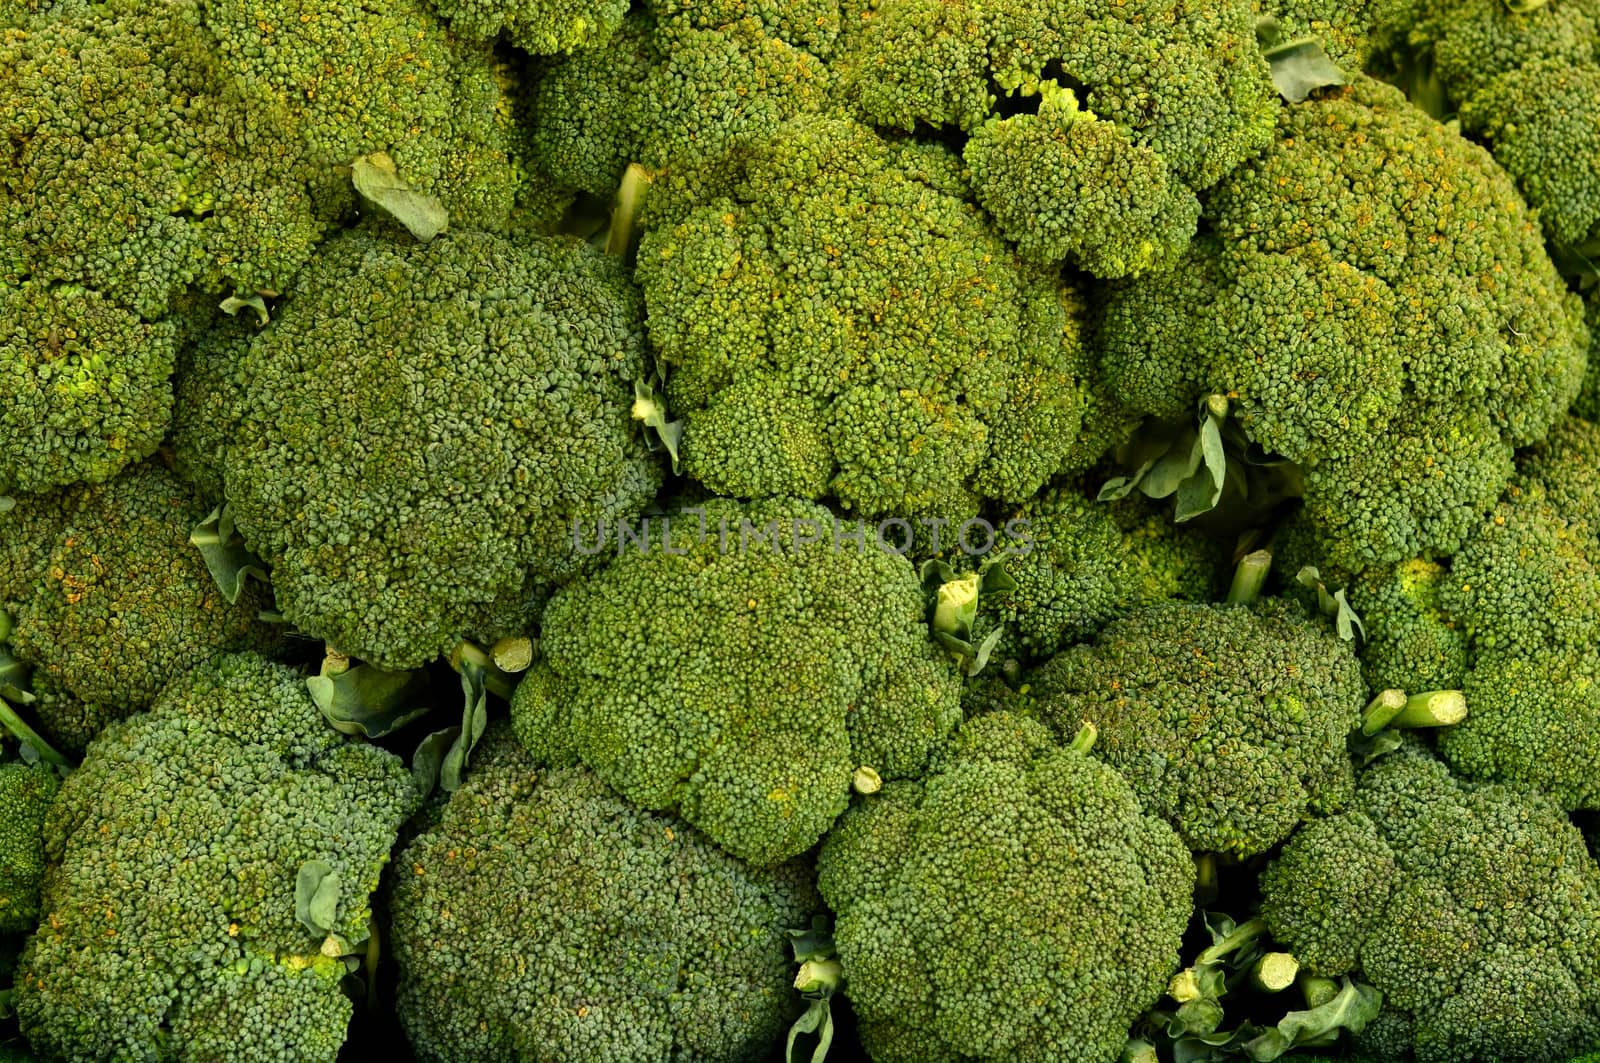 Background Texture Of Broccoli In A Market